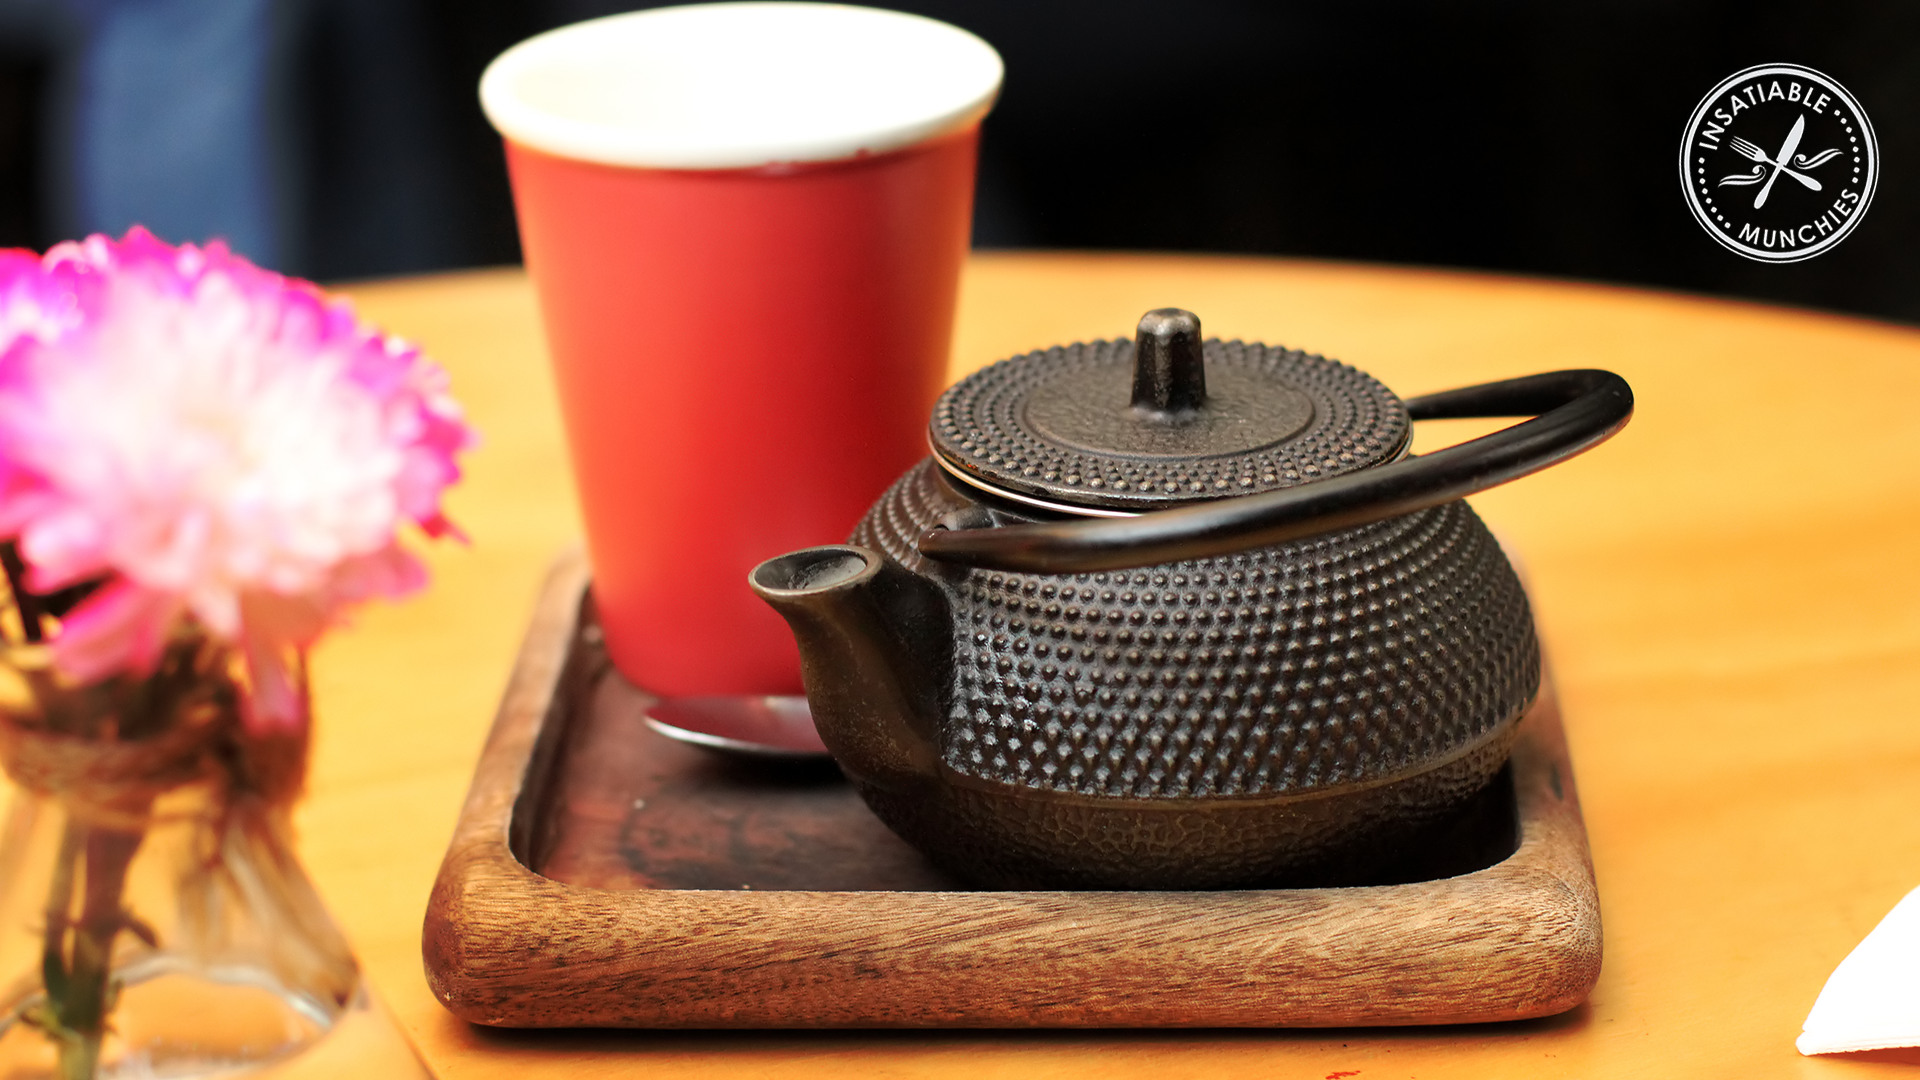 Chai tea served in a traditional iron tea pot